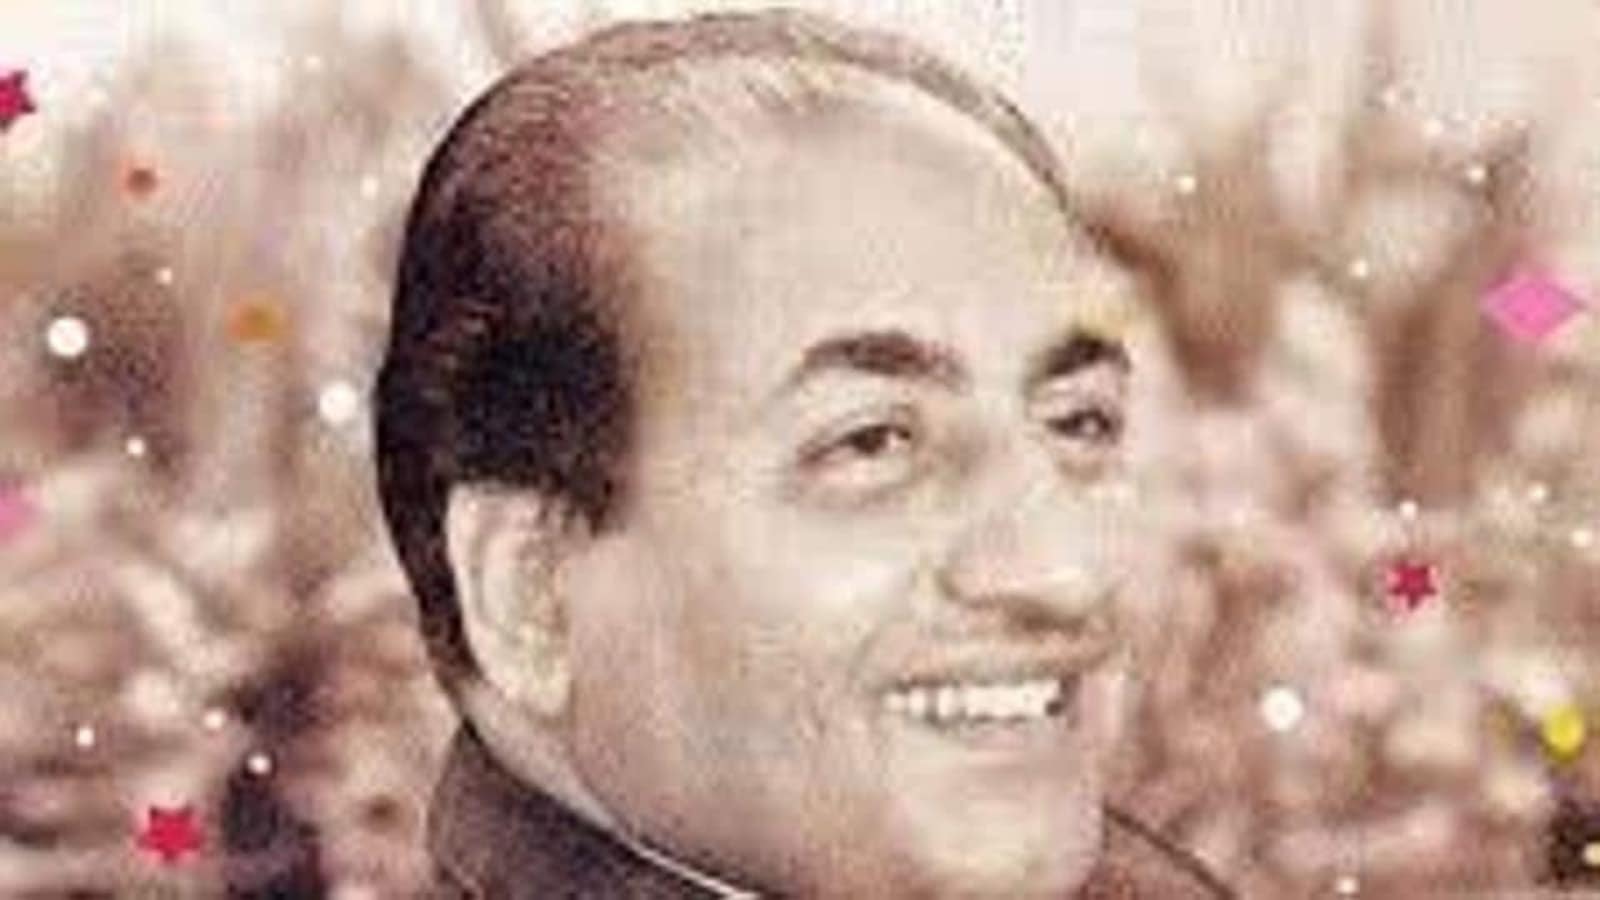 When Mohammed Rafi stopped his car and gave away the slippers he was wearing to a man on Mumbai streets